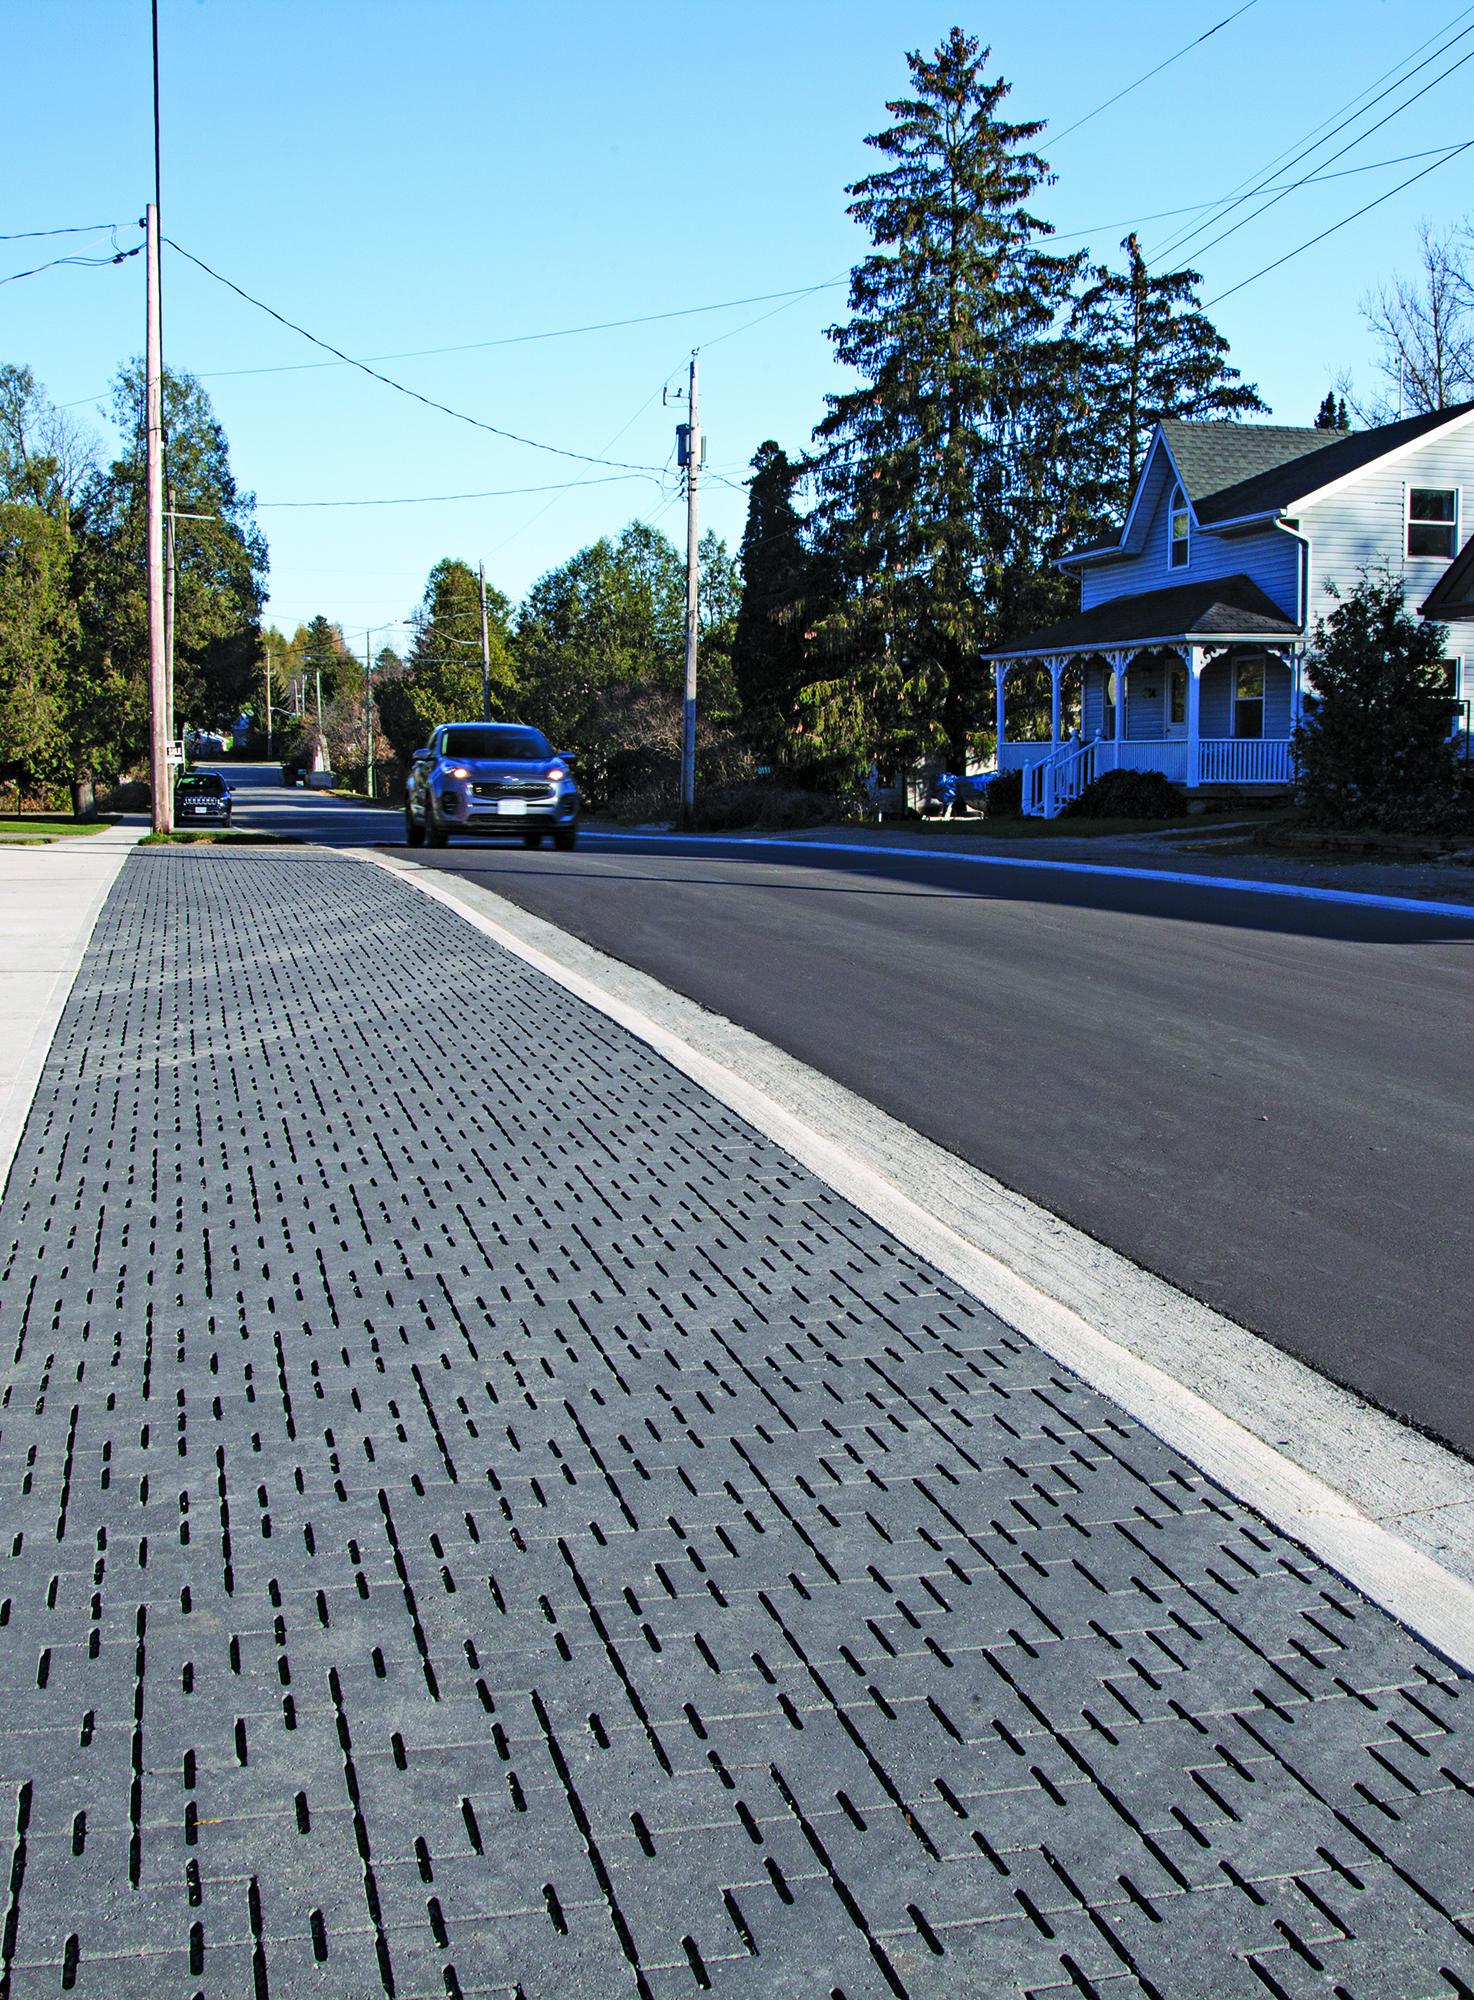 Parking lane on a residential street paved with Unilock Dura-Flow permeable pavers.